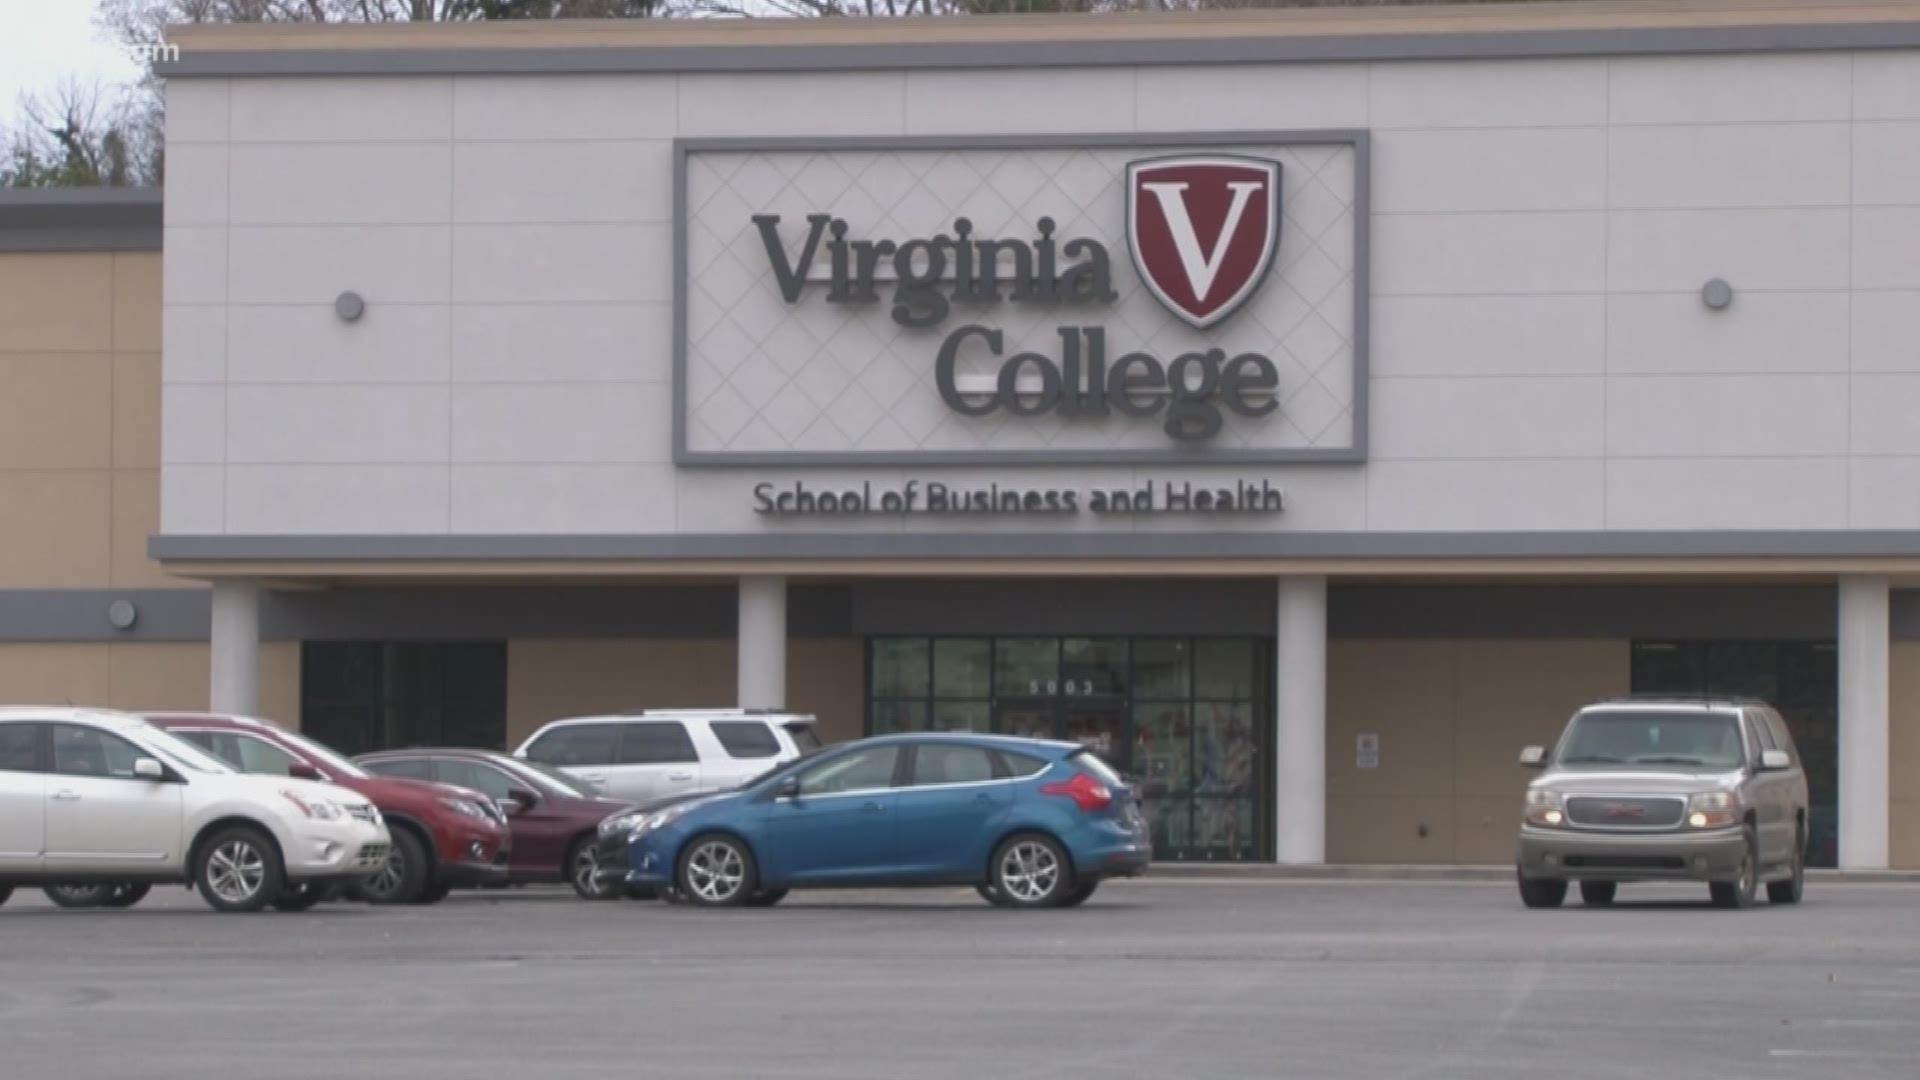 Education Corporation of America announced it is closing several campuses including Virginia College in Knoxville.